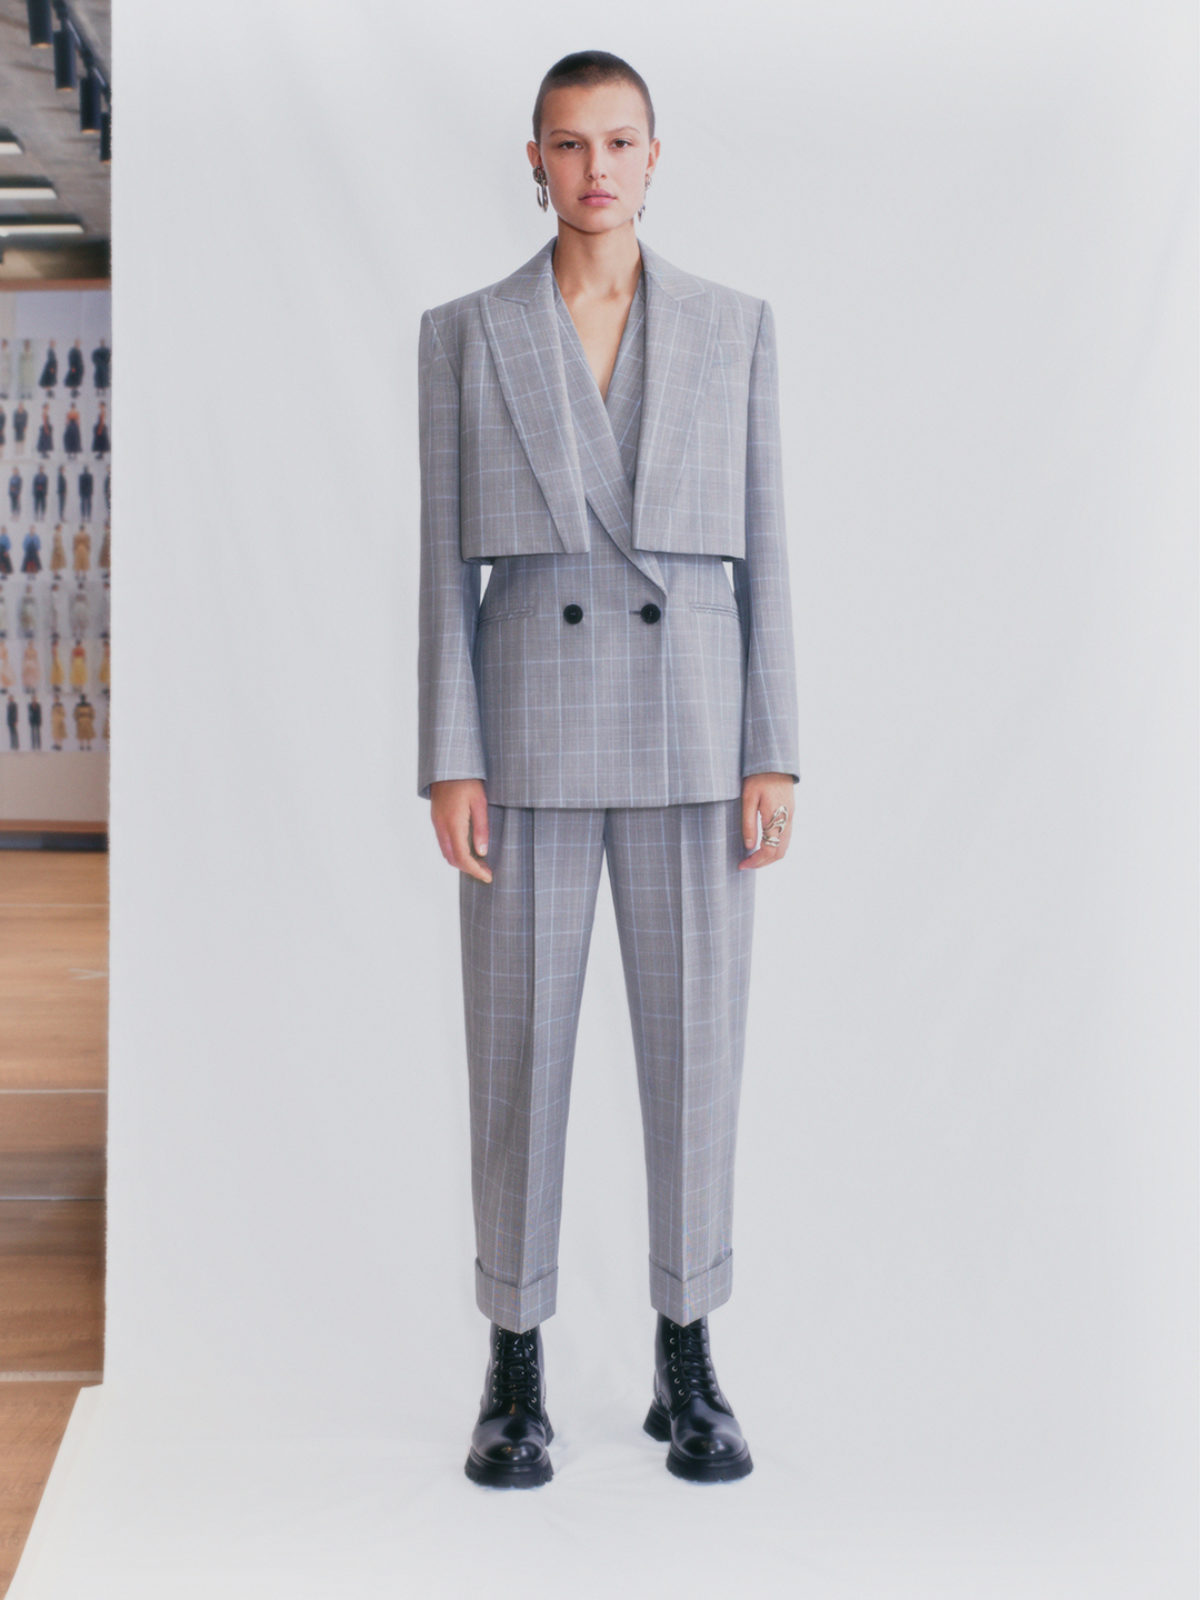 Alexander McQueen's New Season Tailoring Is Stripped To The Bone